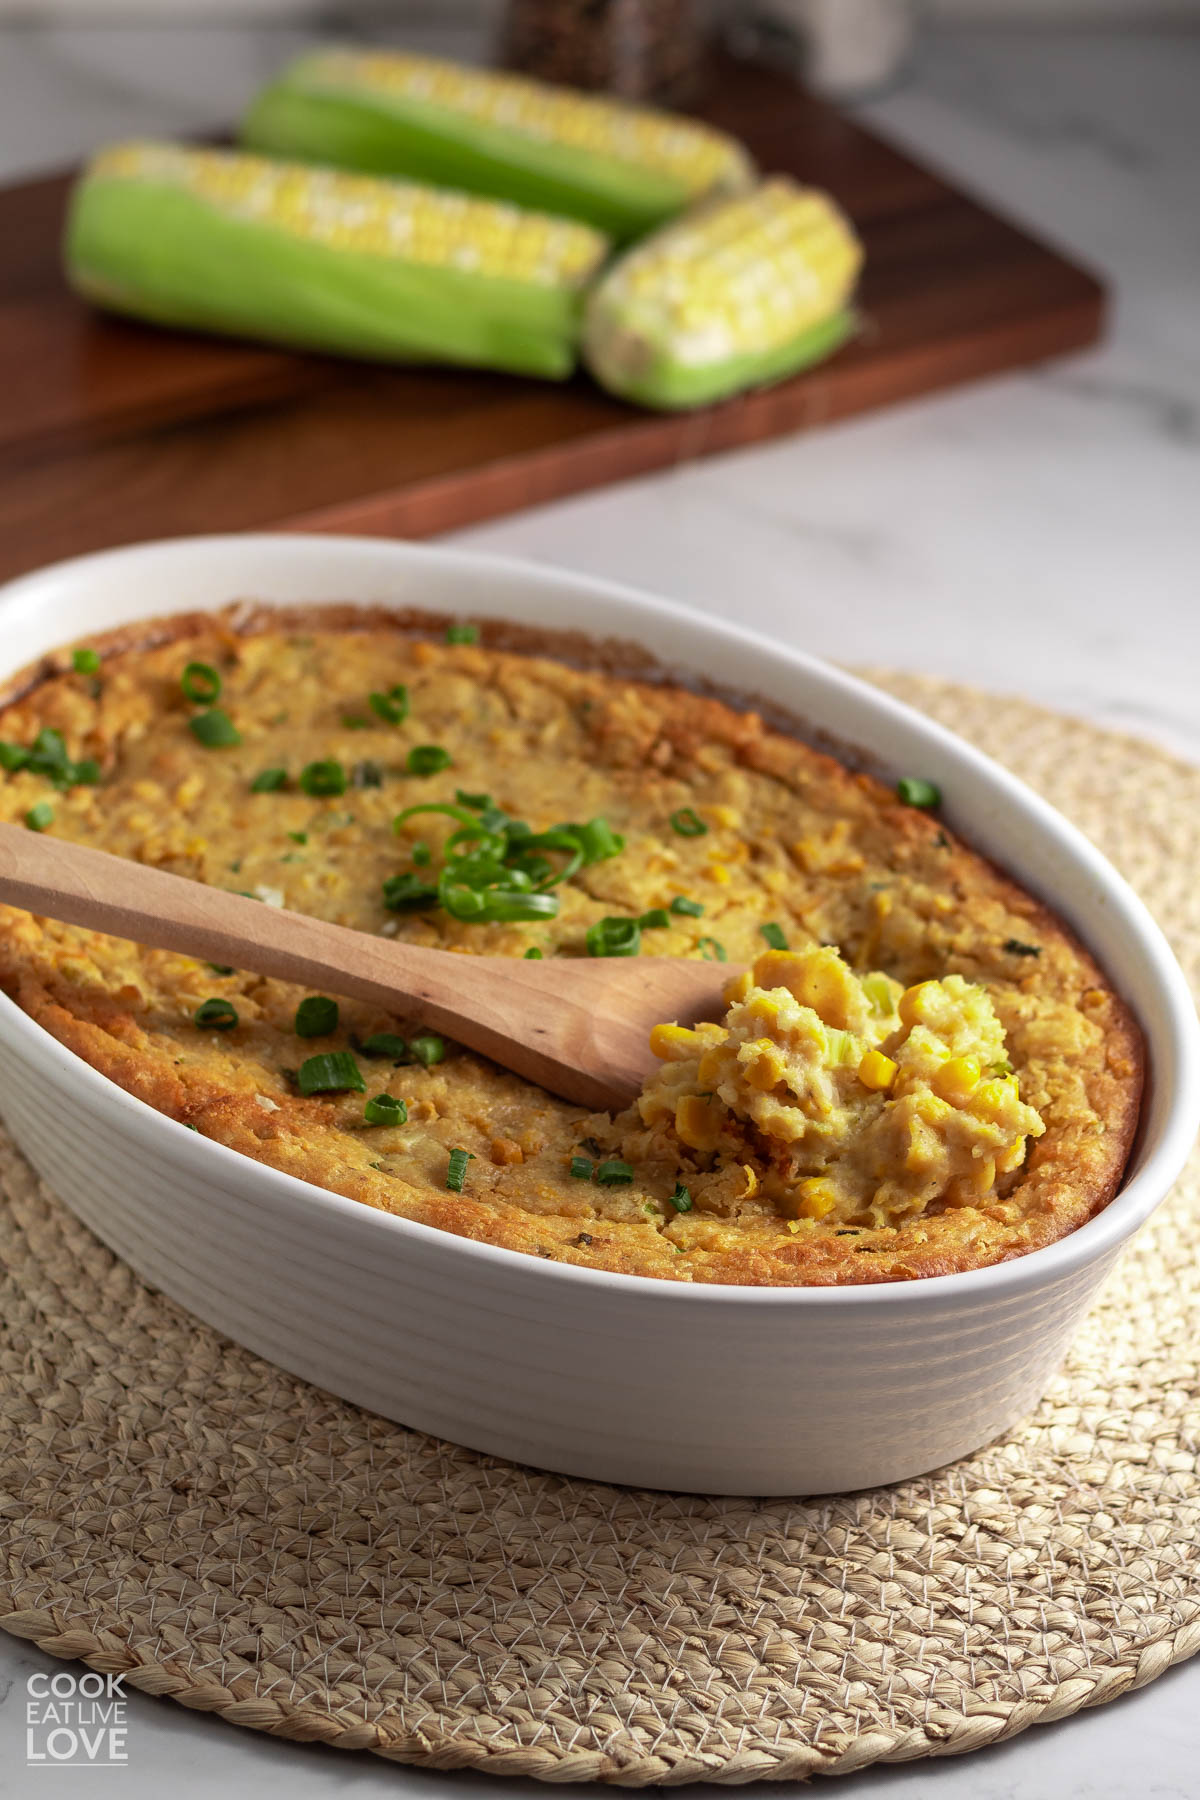 Vegan corn casserole in an oval white baking dish with a wooden spoon in it scooping some out.